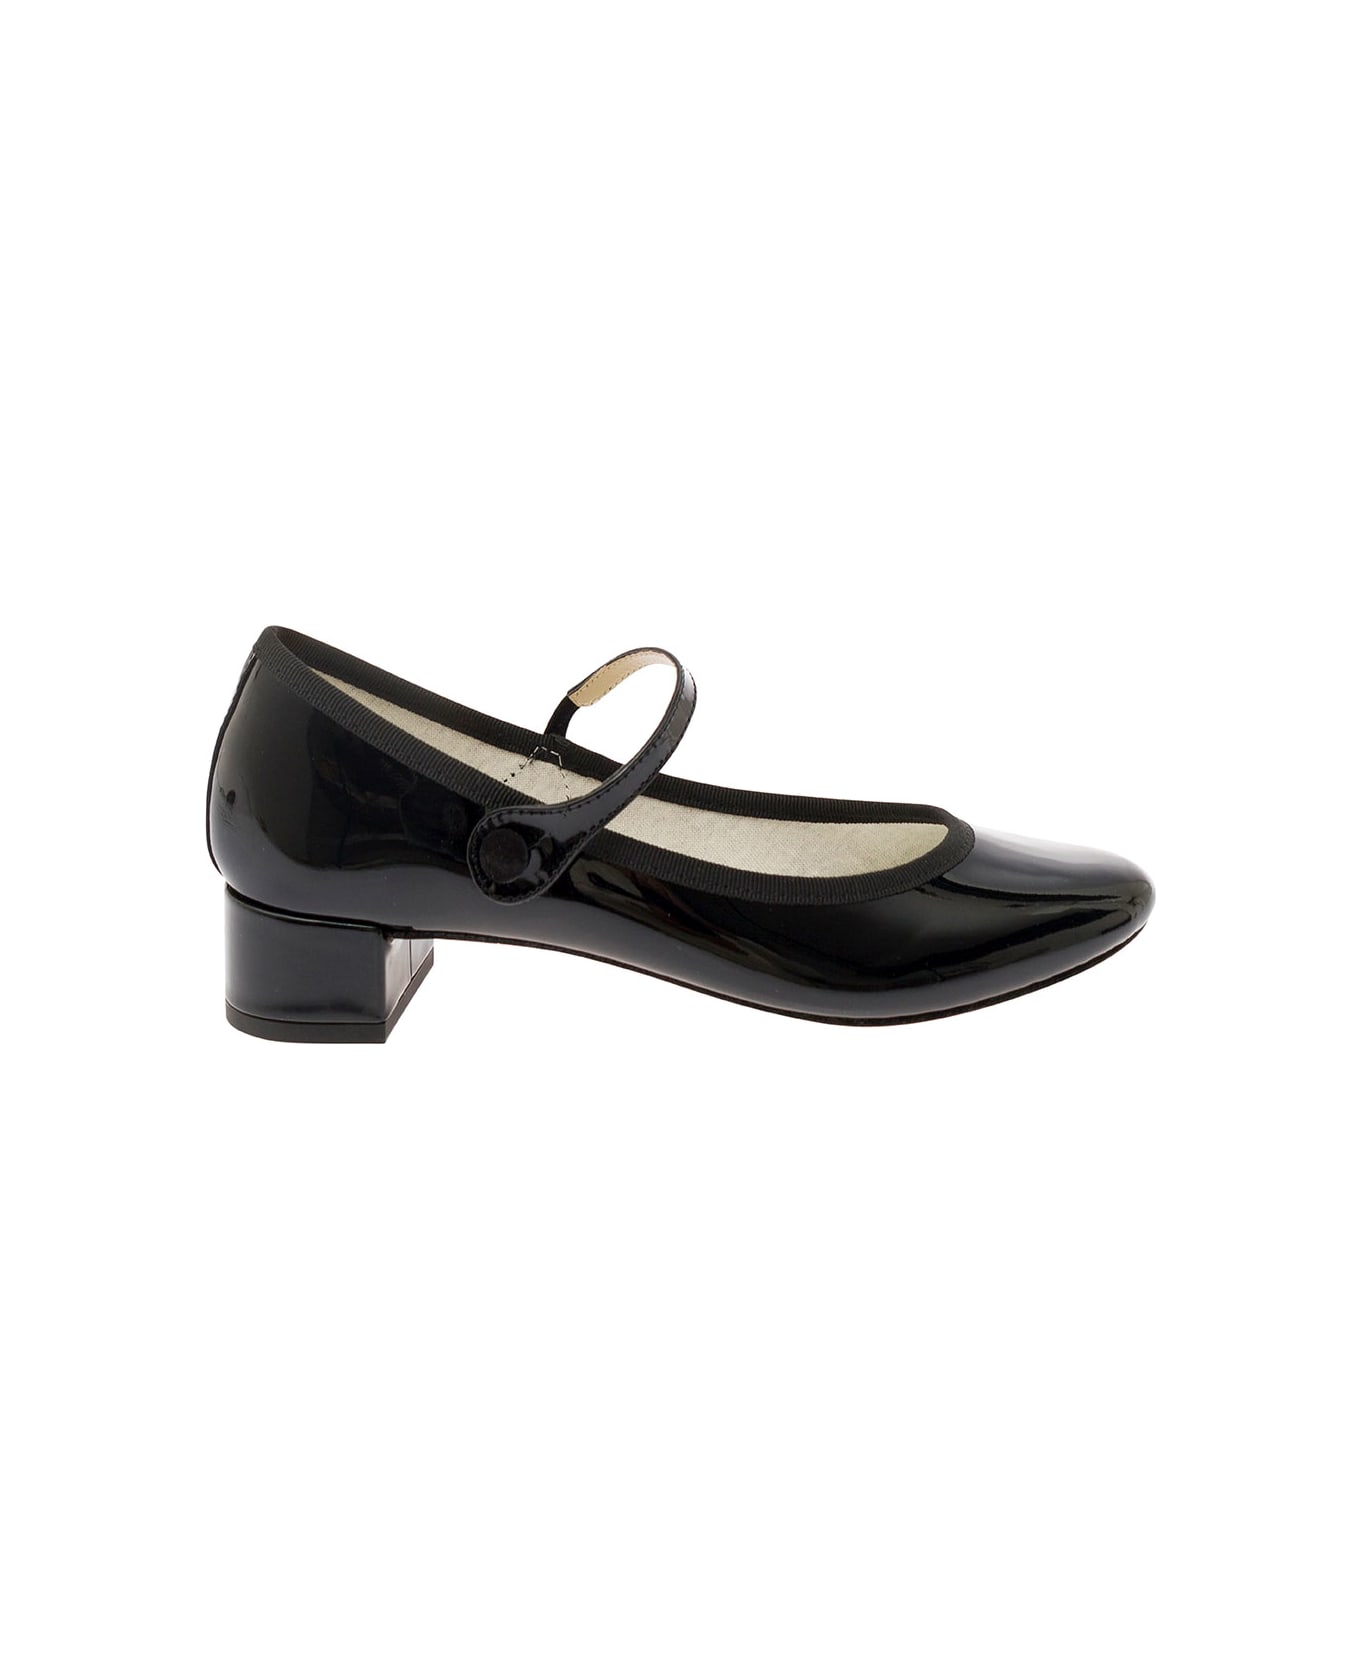 Repetto 'rose' Black Mary Janes With Strap In Patent Leather Woman - Black